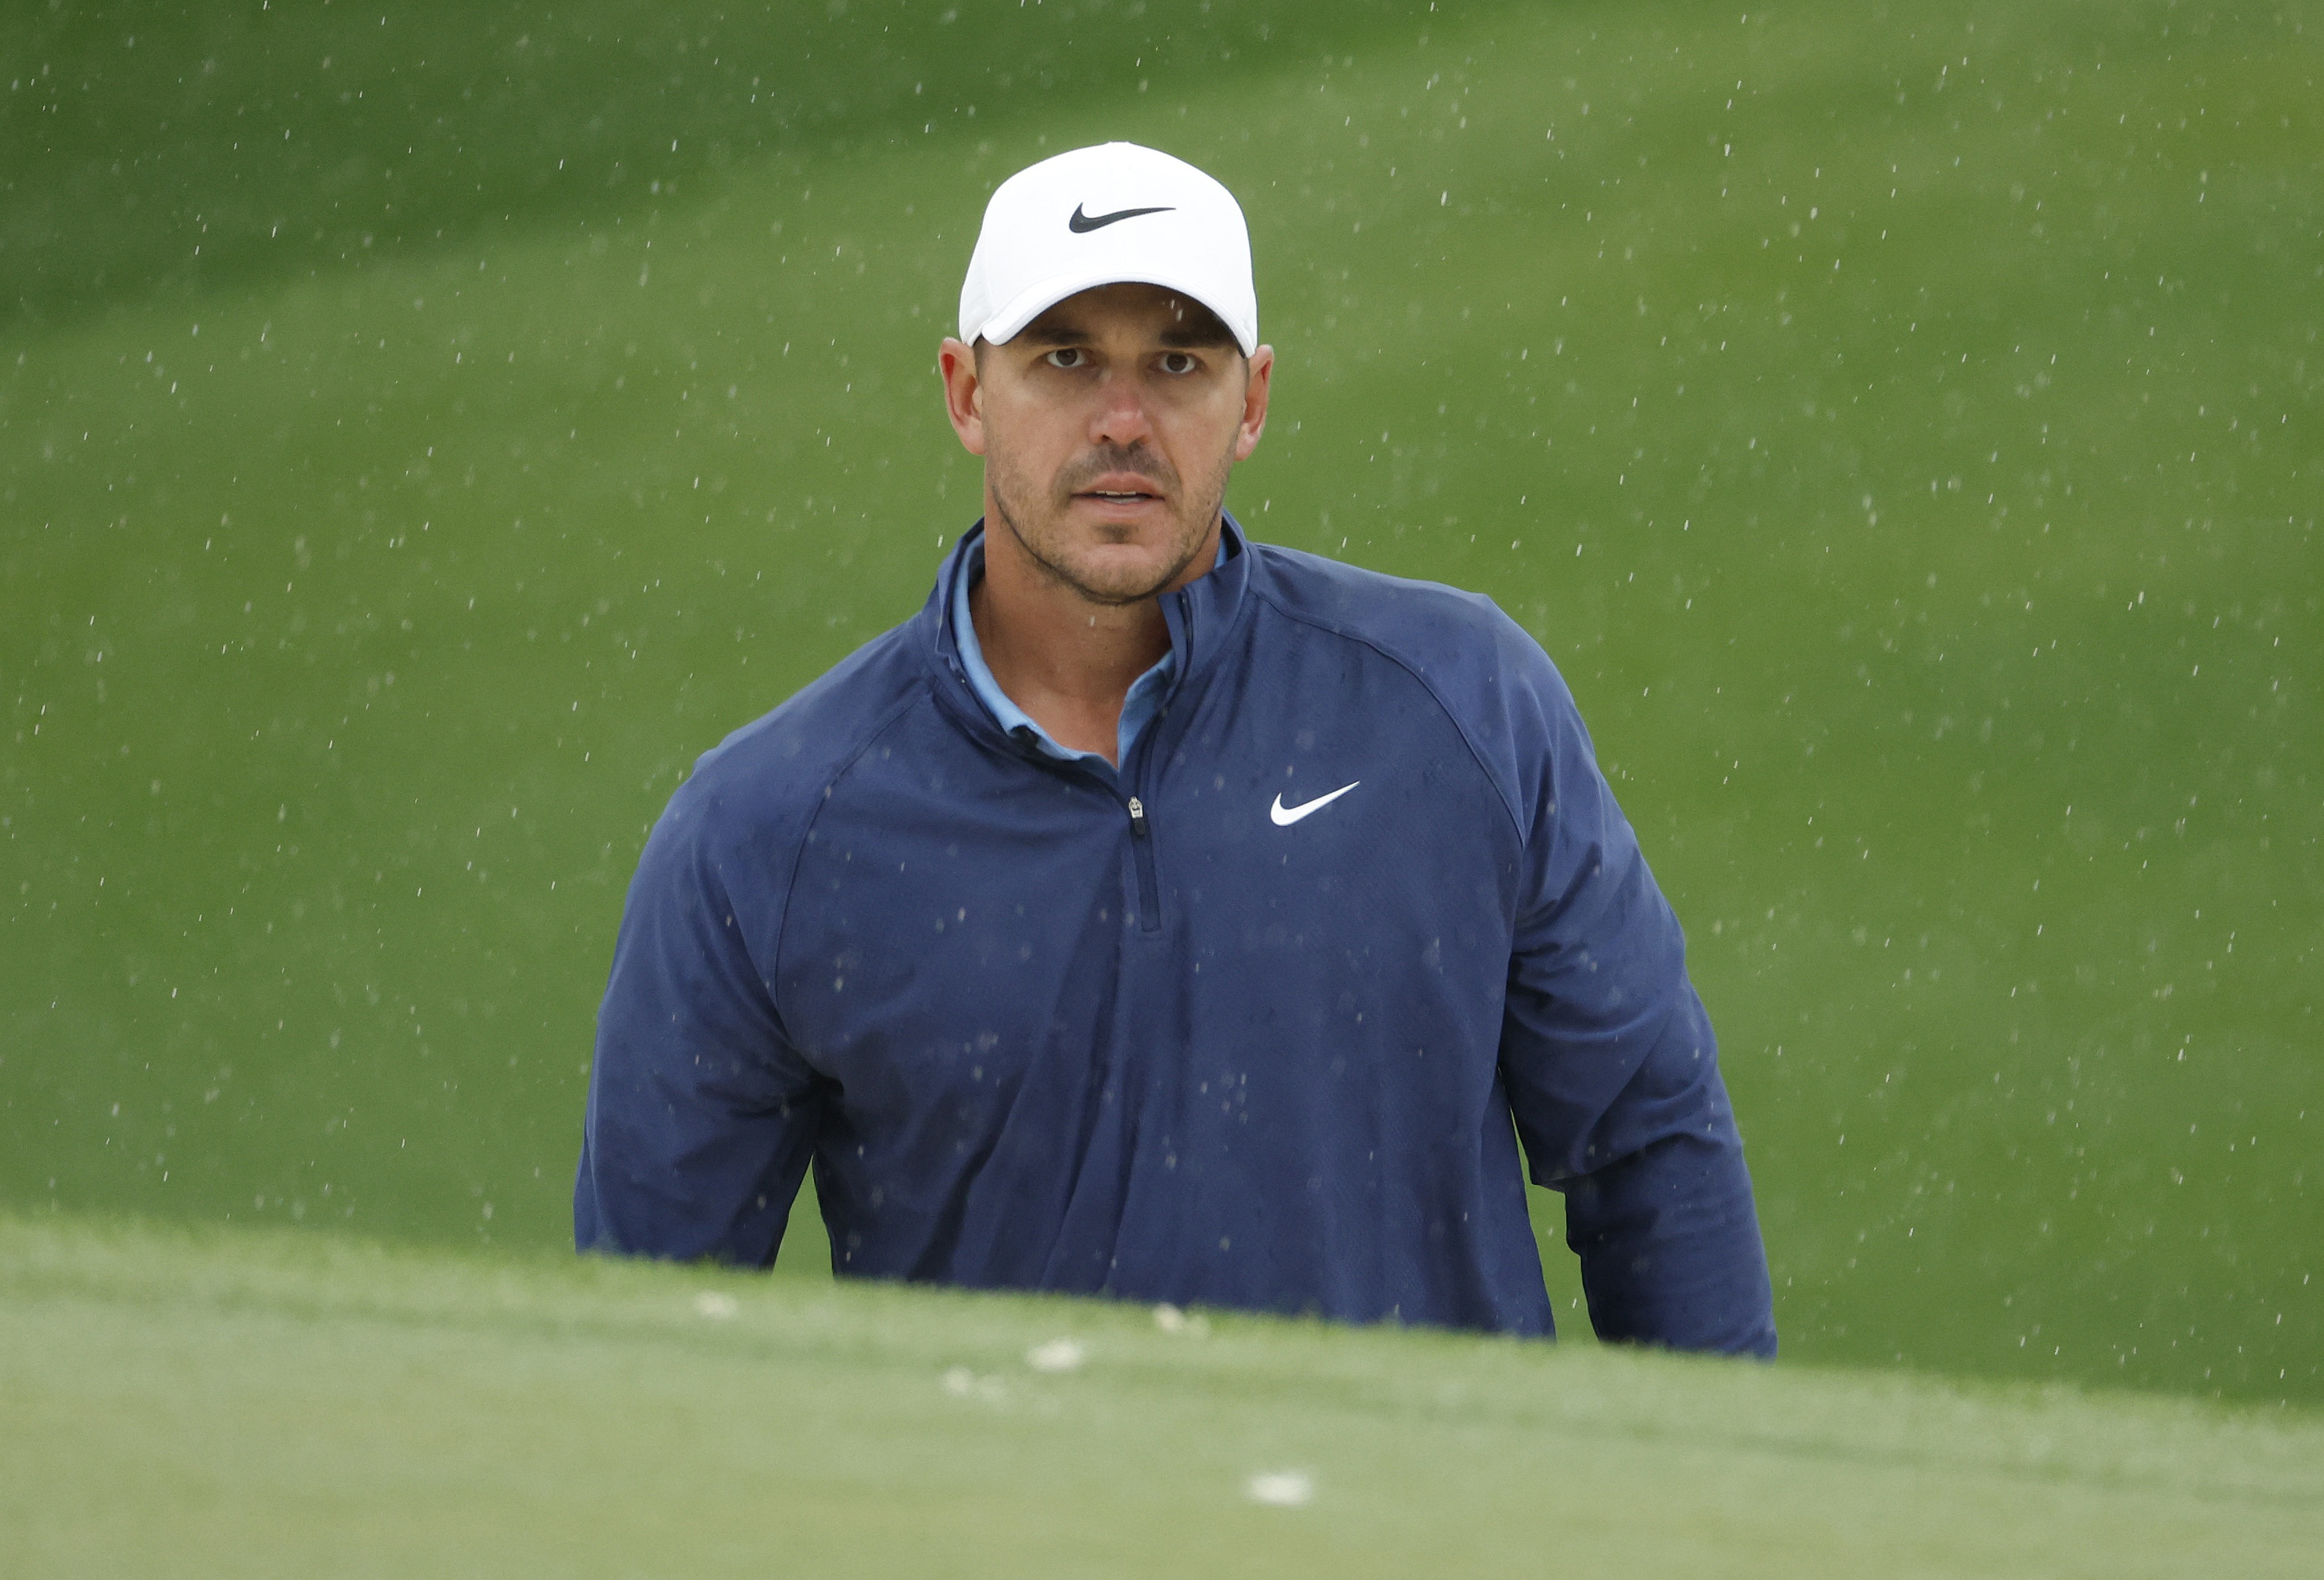 Brooks Koepka sends a message to the Masters field: 'I'm finally